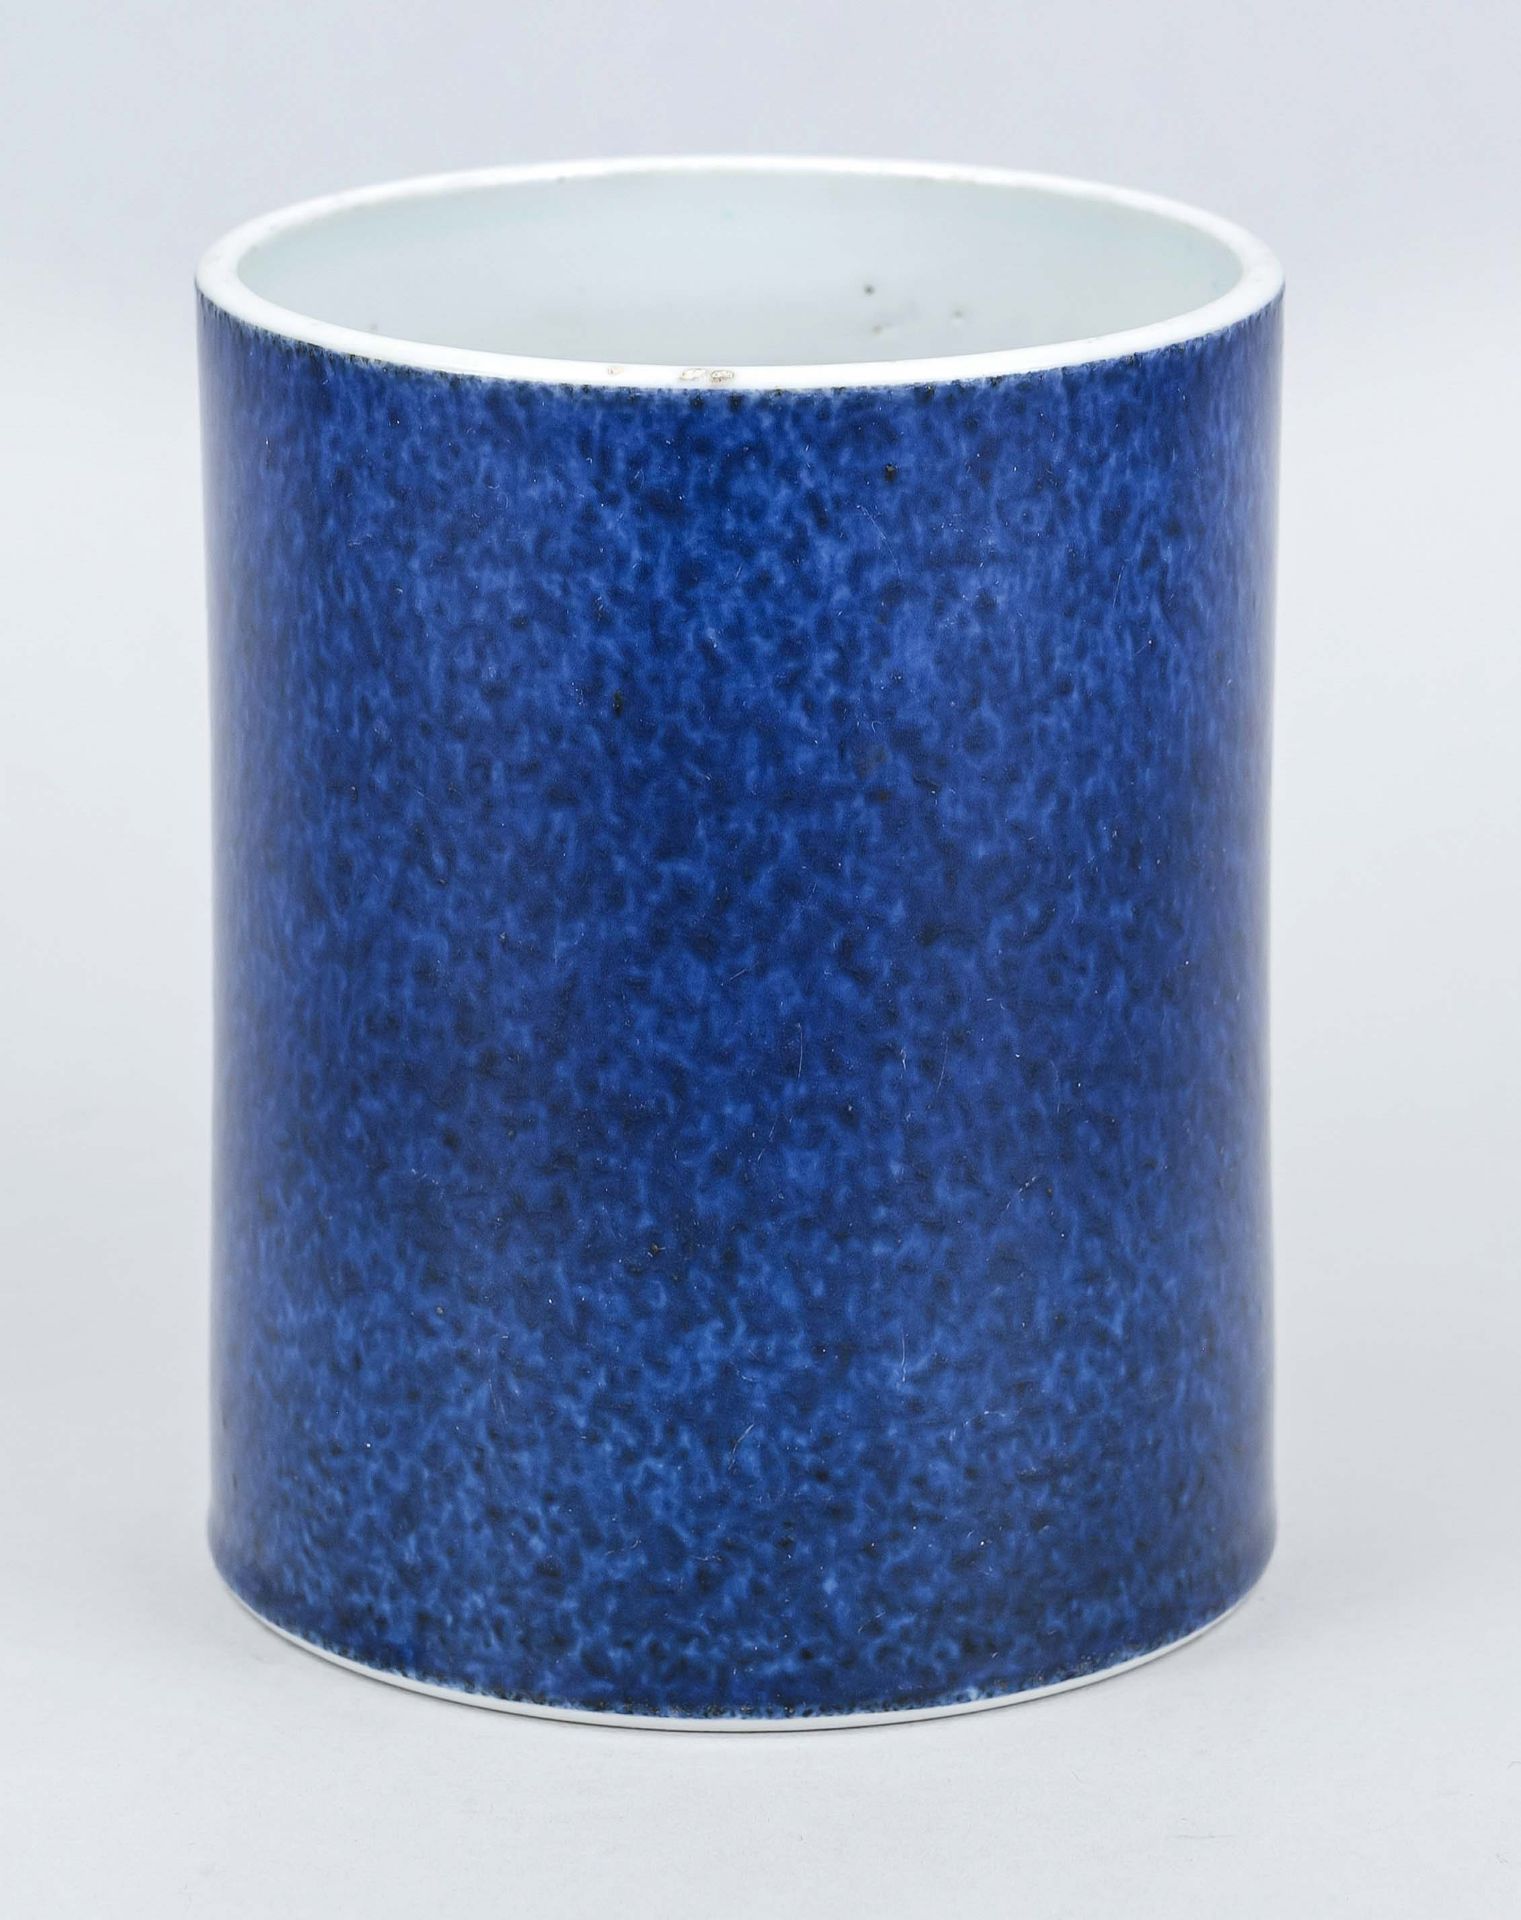 Monochrome brush cup, China probably Qing. Cylindrical form with so-called ''Powder Blue'' glaze, h.